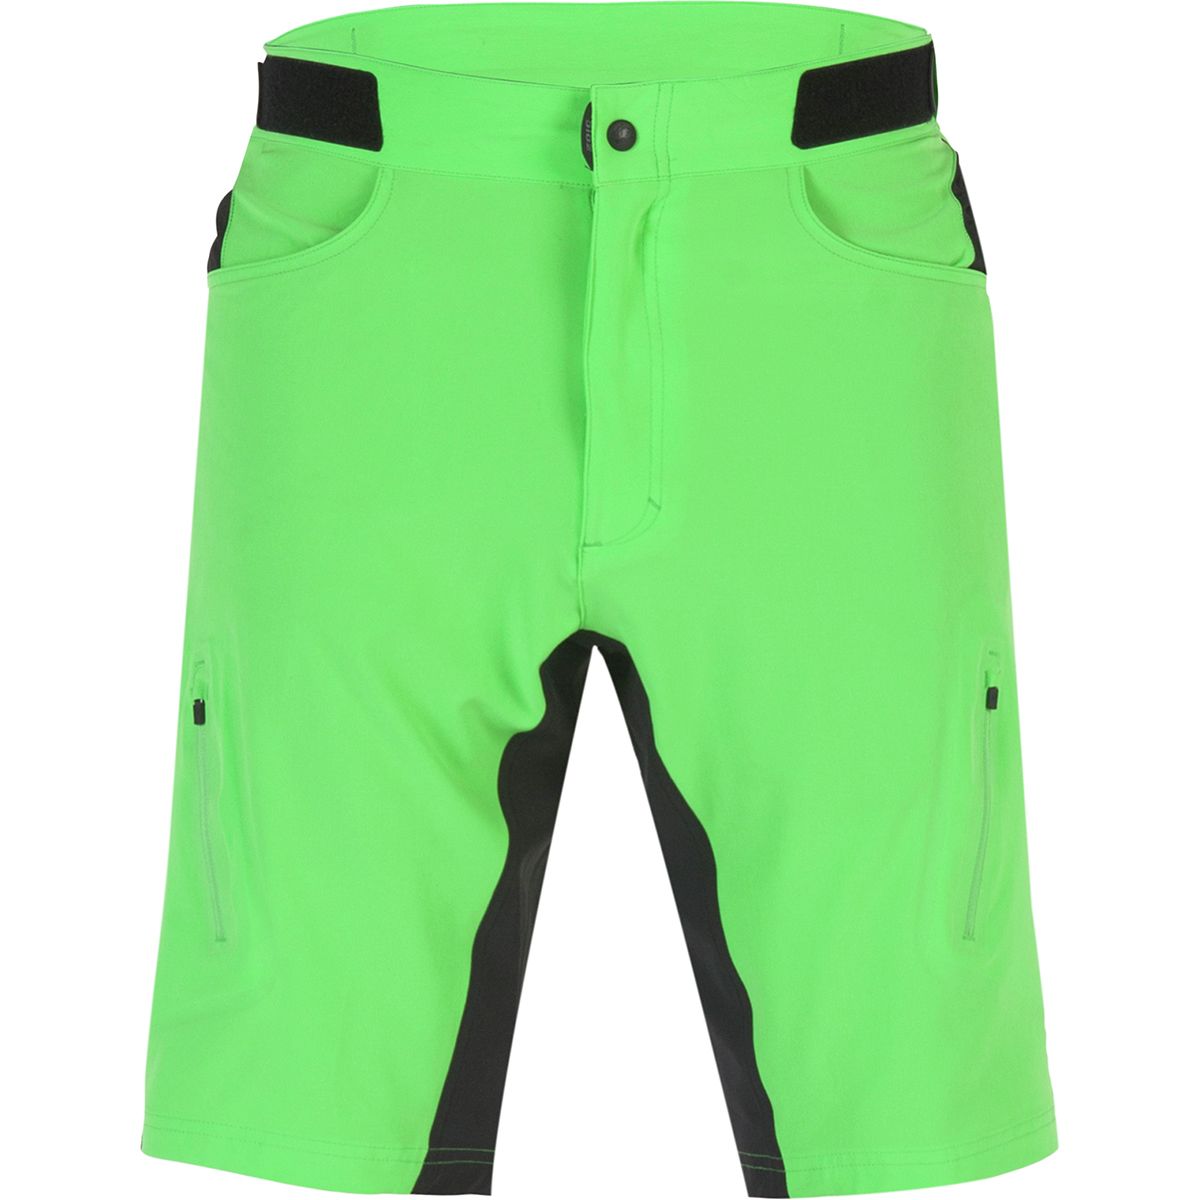 ZOIC Ether One Shorts - Men's